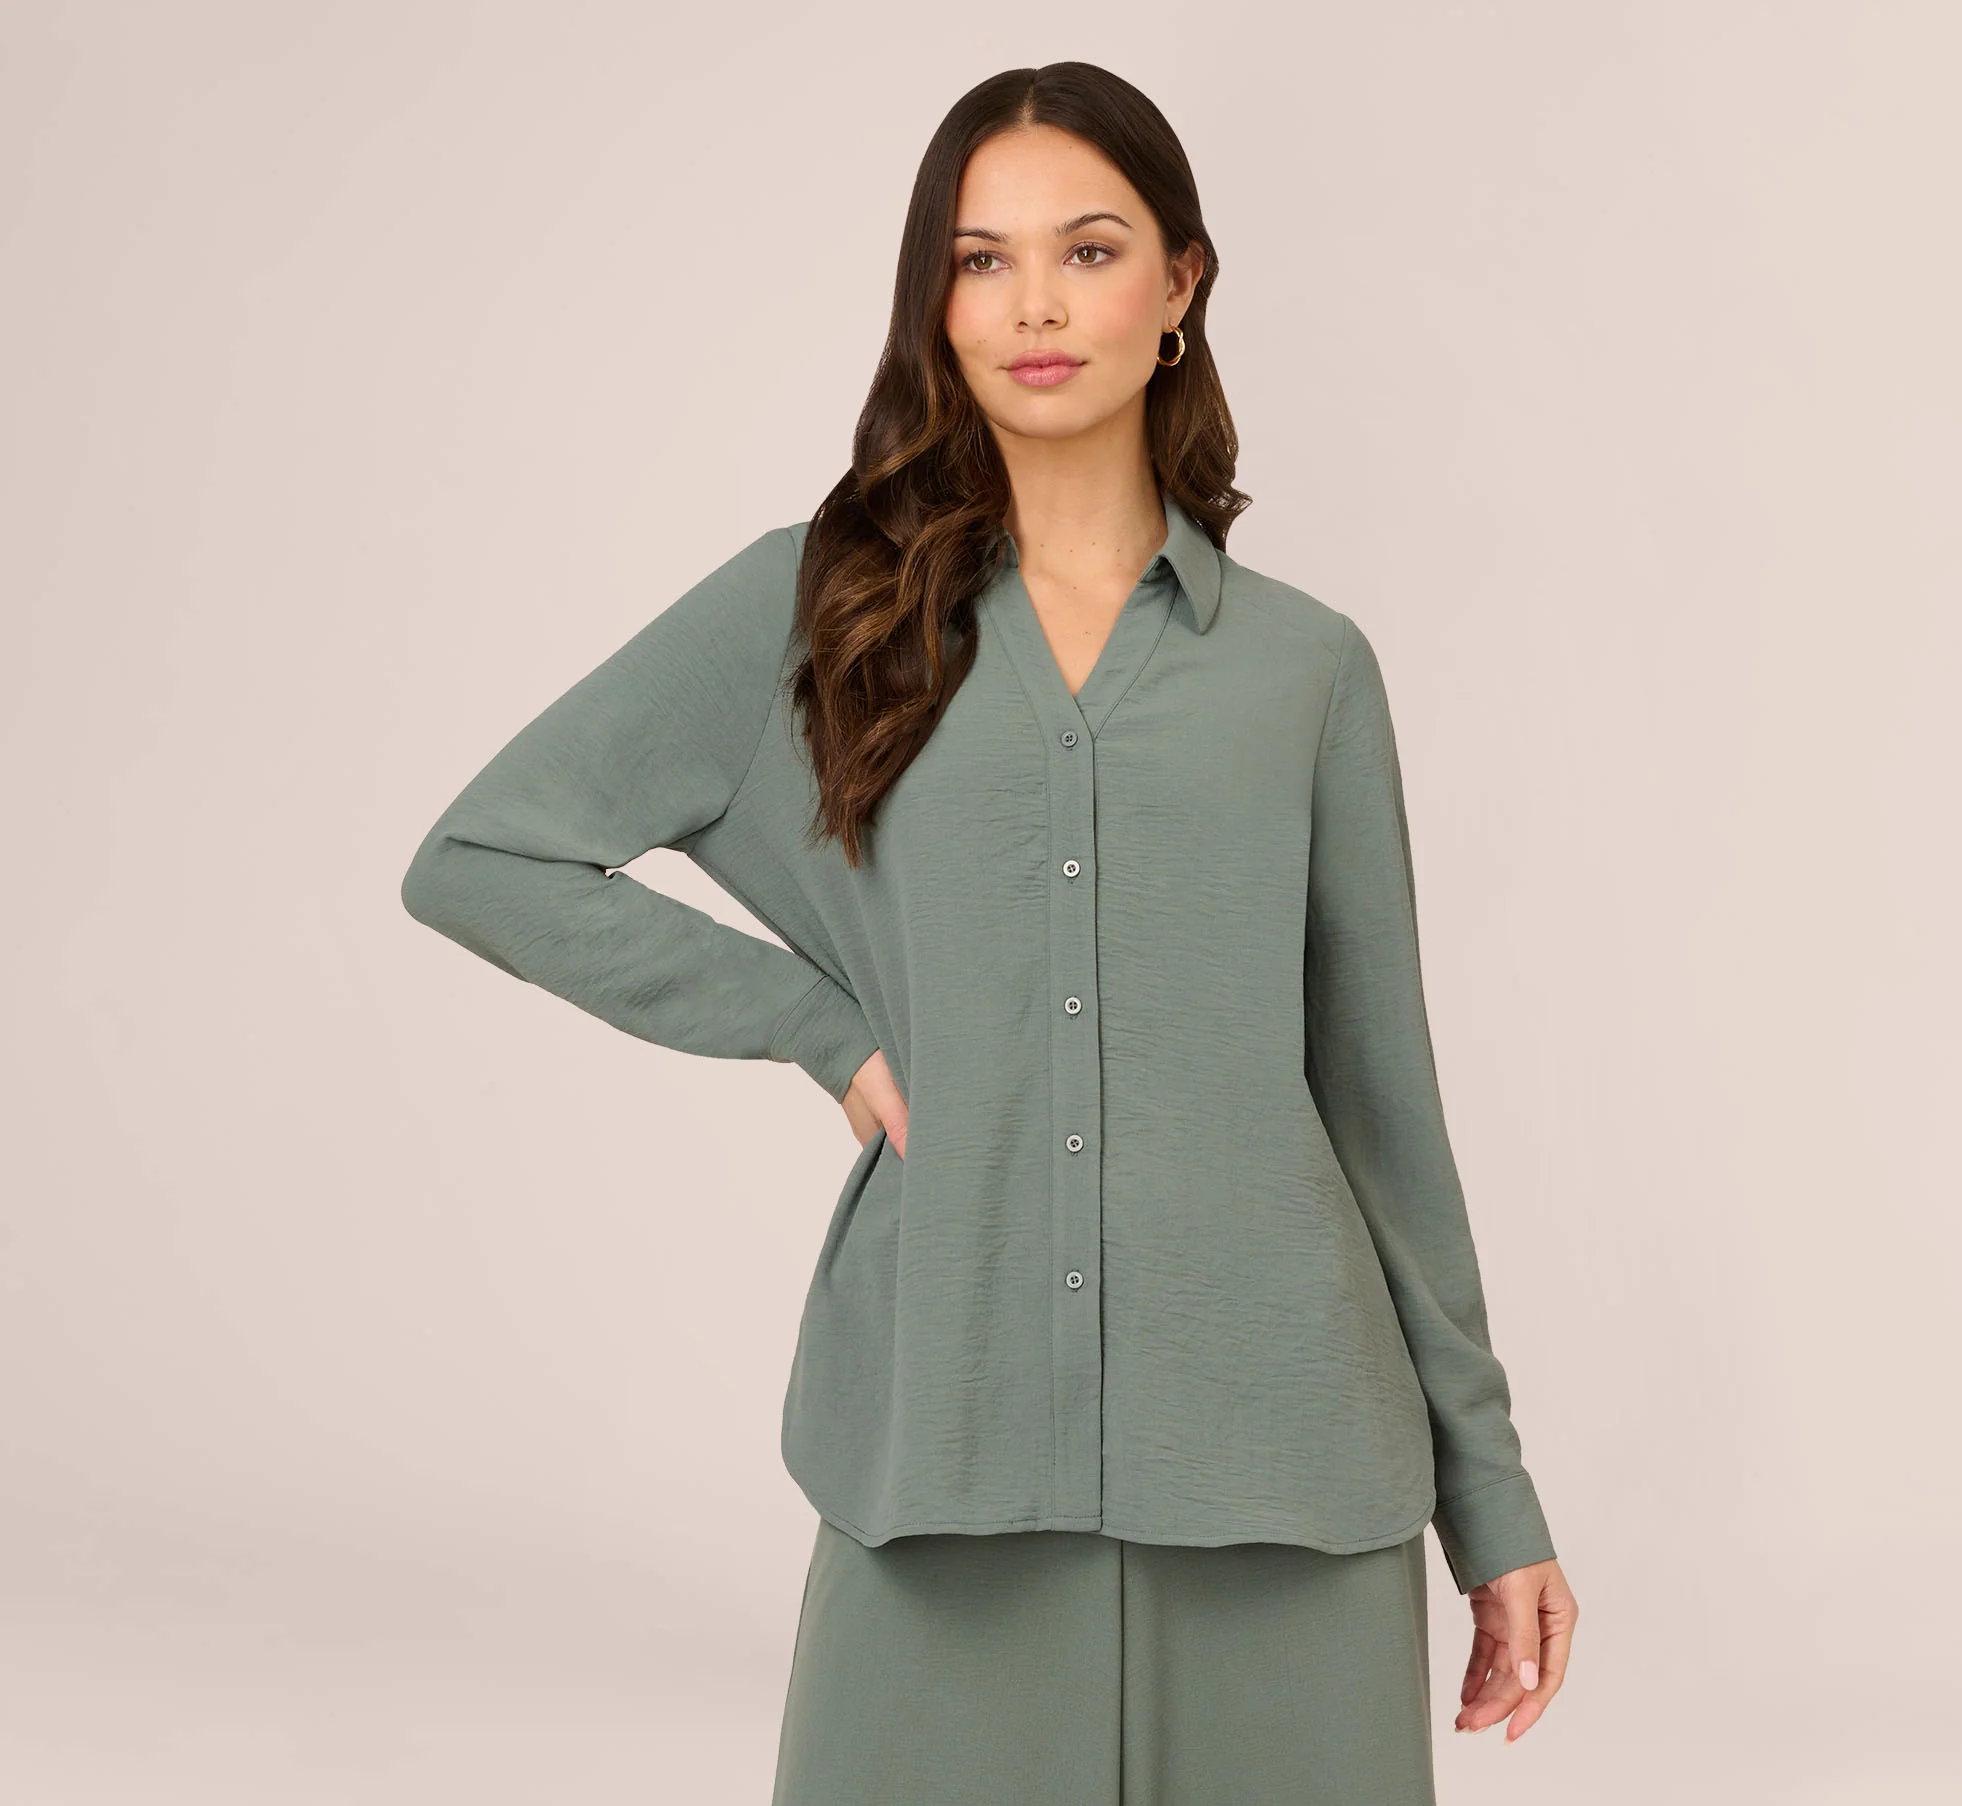 TEXTURE WOVEN BUTTON UP SHIRT WITH LONG SLEEVES IN DUSTY SEAFOAM